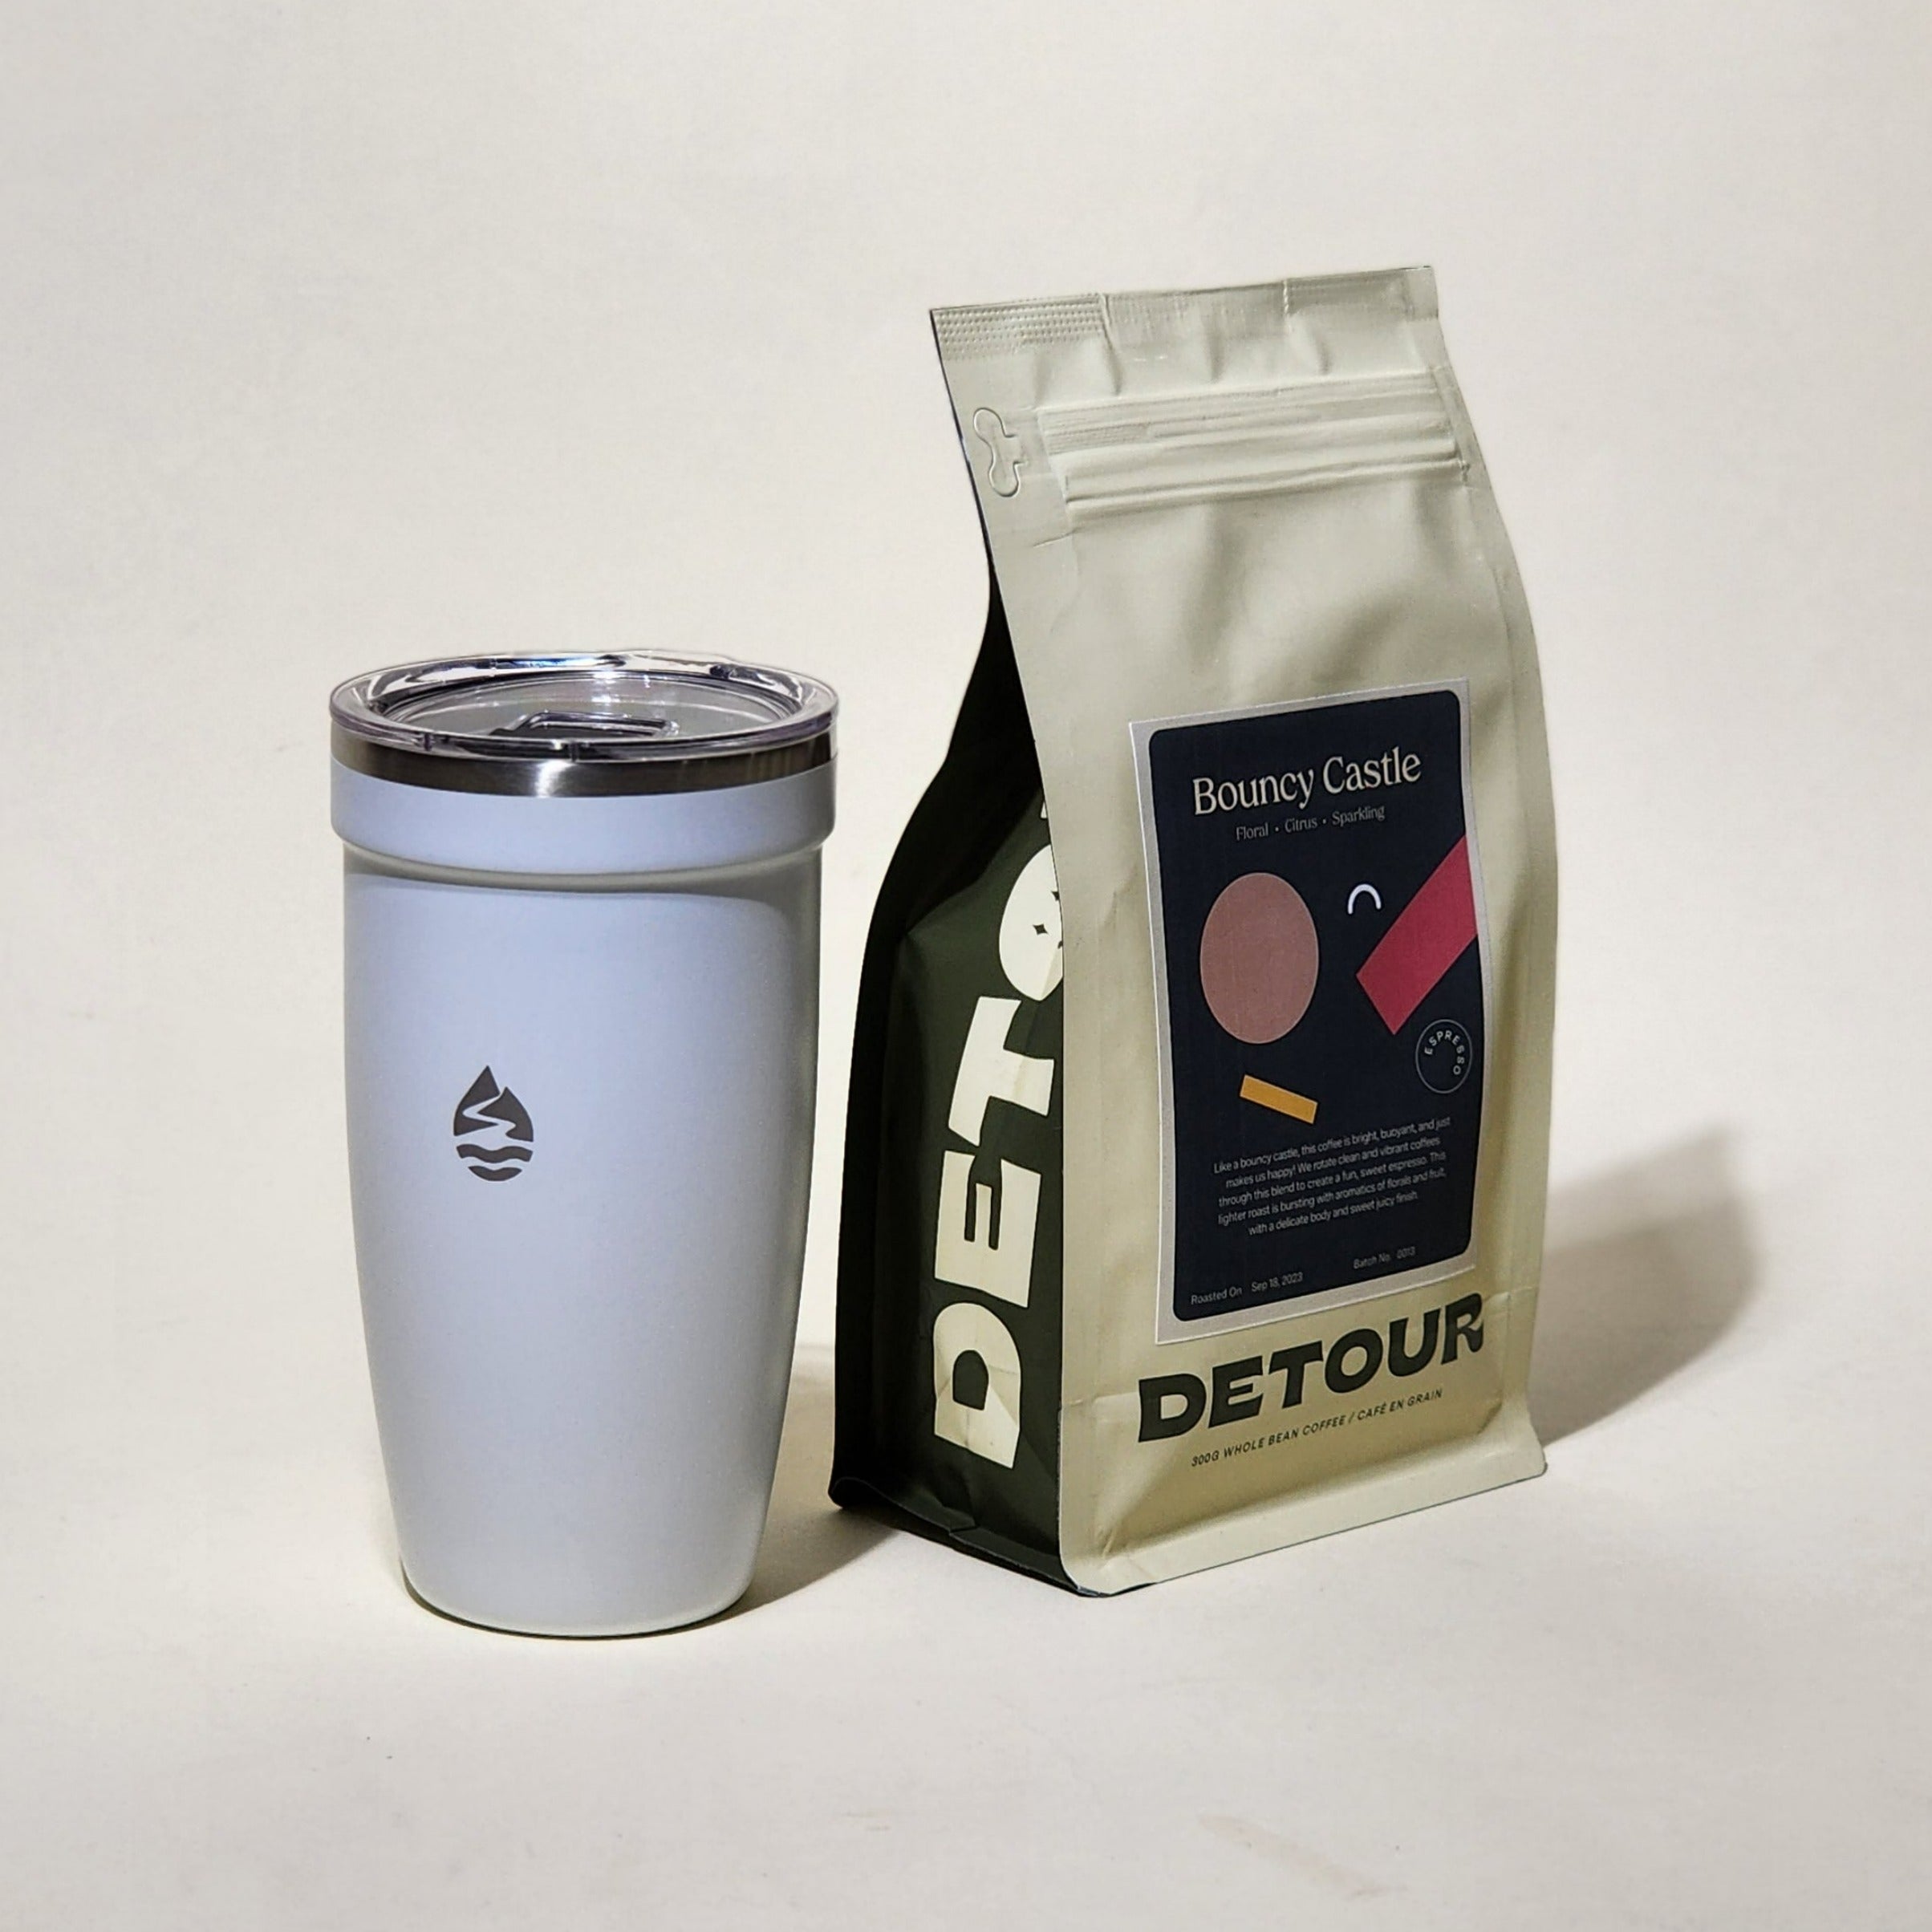 Detour Coffee Roaster Bouncy Castle Espresso - Floral, Citrus, Sparkling Tasting Profile - Espresso Vibrant Coffee Style - Limu, Ethiopia Origin - Heirloom Variety - Washed Process - Various Smallholders Producer - Bright and Buoyant Coffee - Sunshine in a Cup - Learn More on Our Website